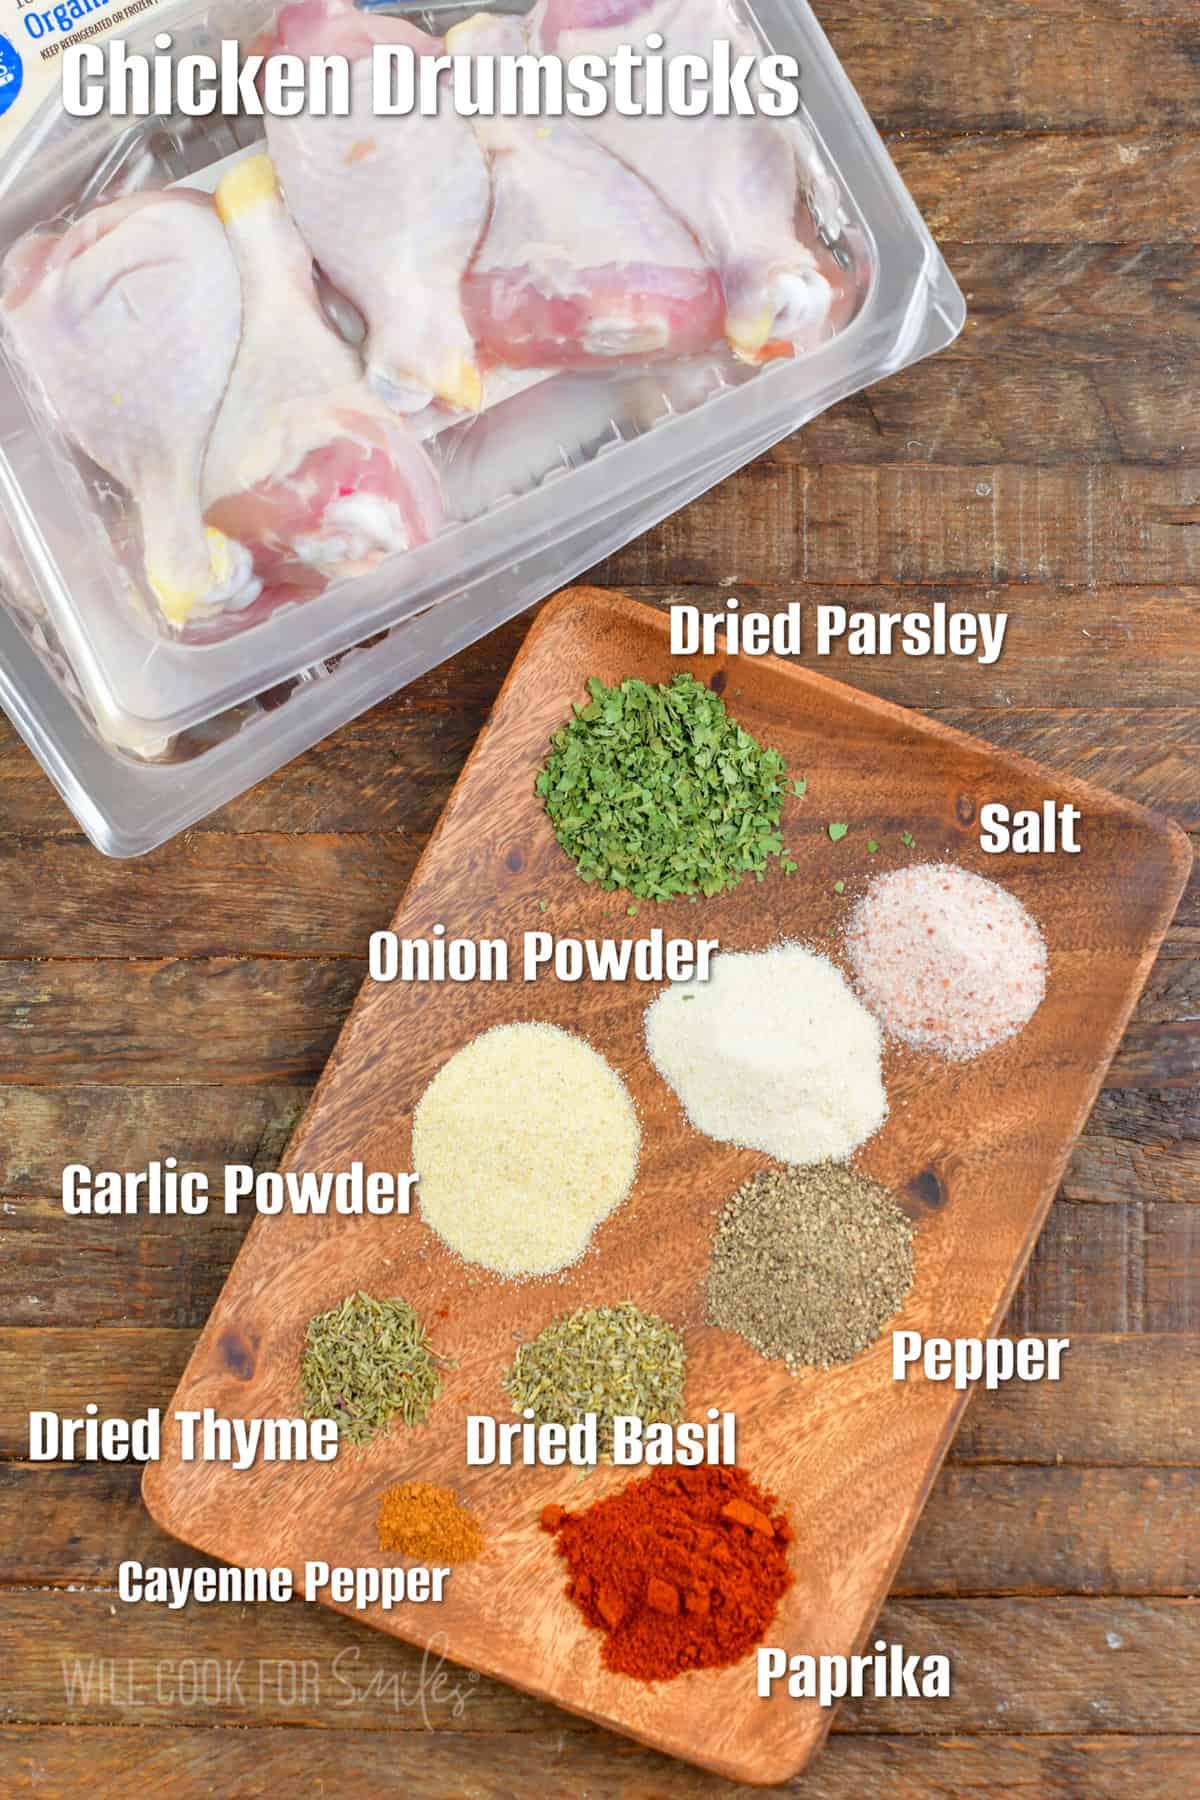 The ingredients for baked chicken drumsticks are placed on a wooden surface. 